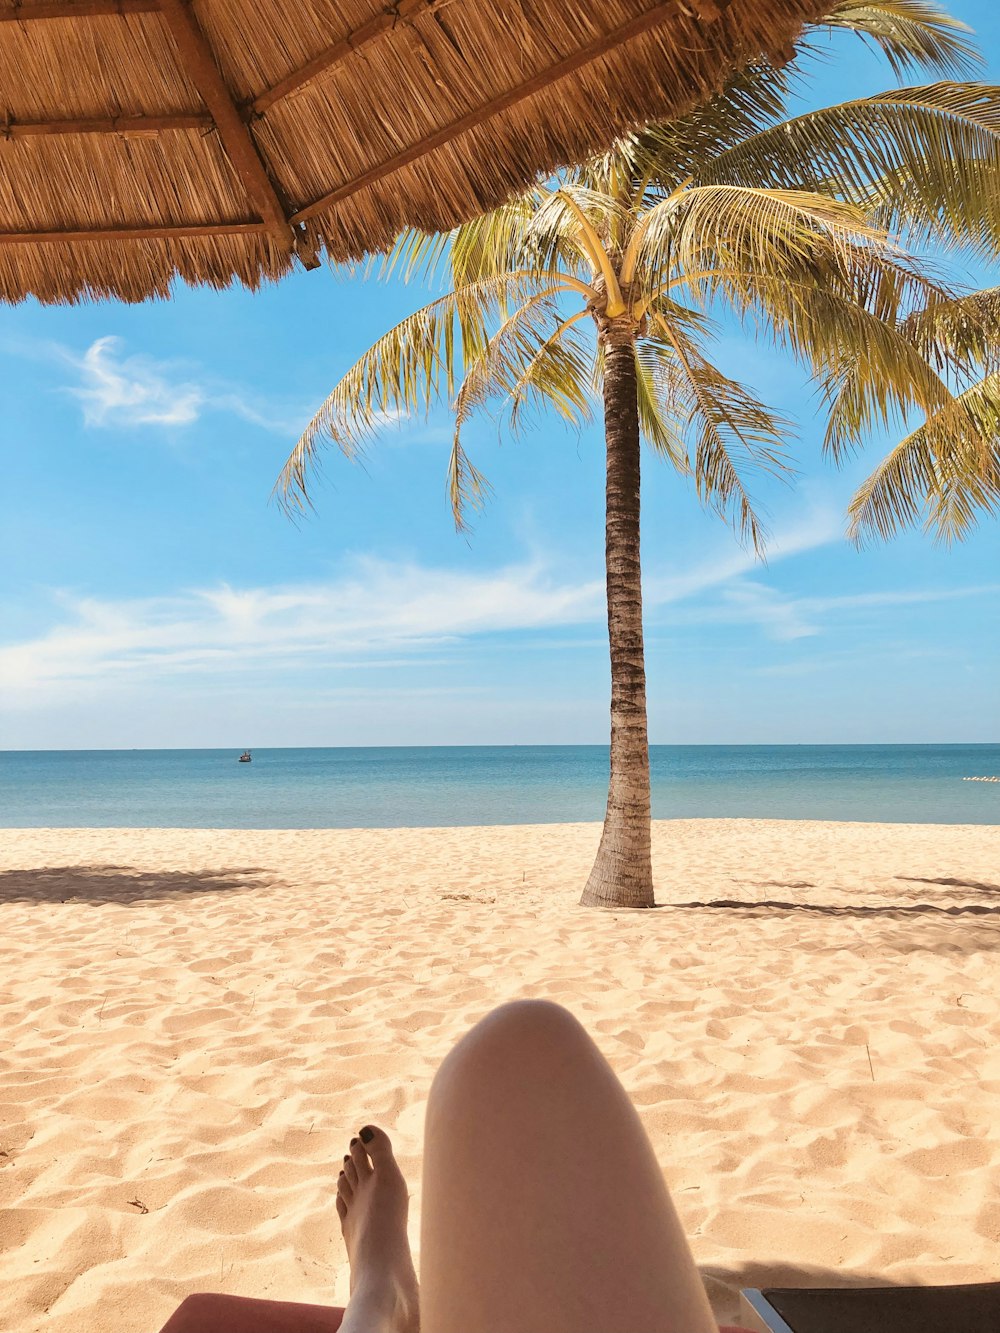 a person laying on a beach under a palm tree